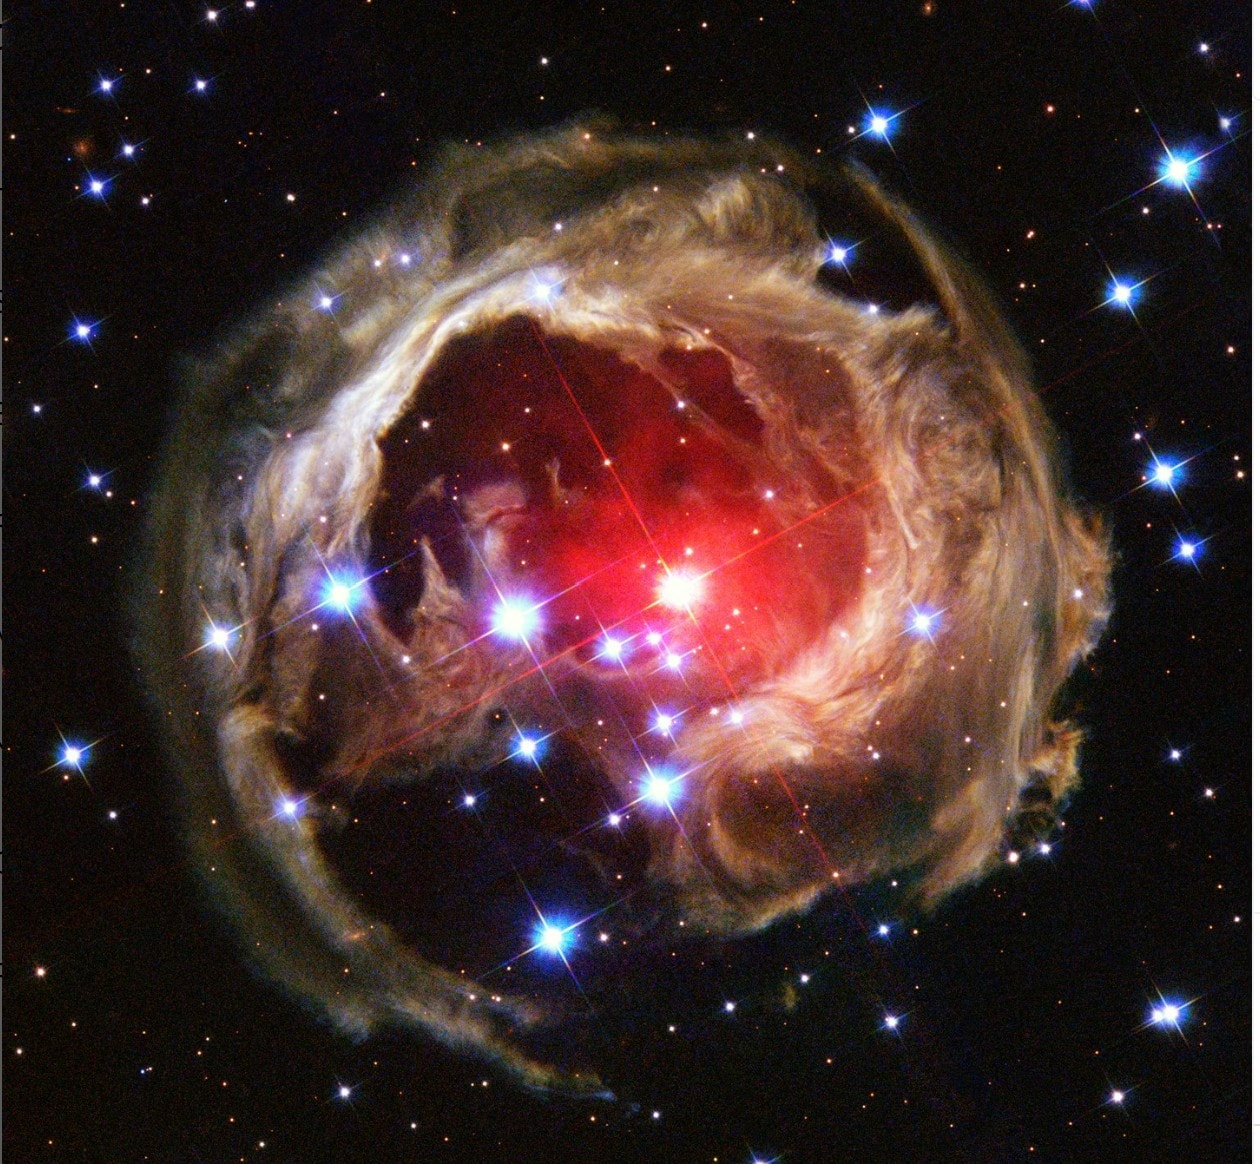 NASA Hubble captured the sight of a distant star named V838 Monocreotis.